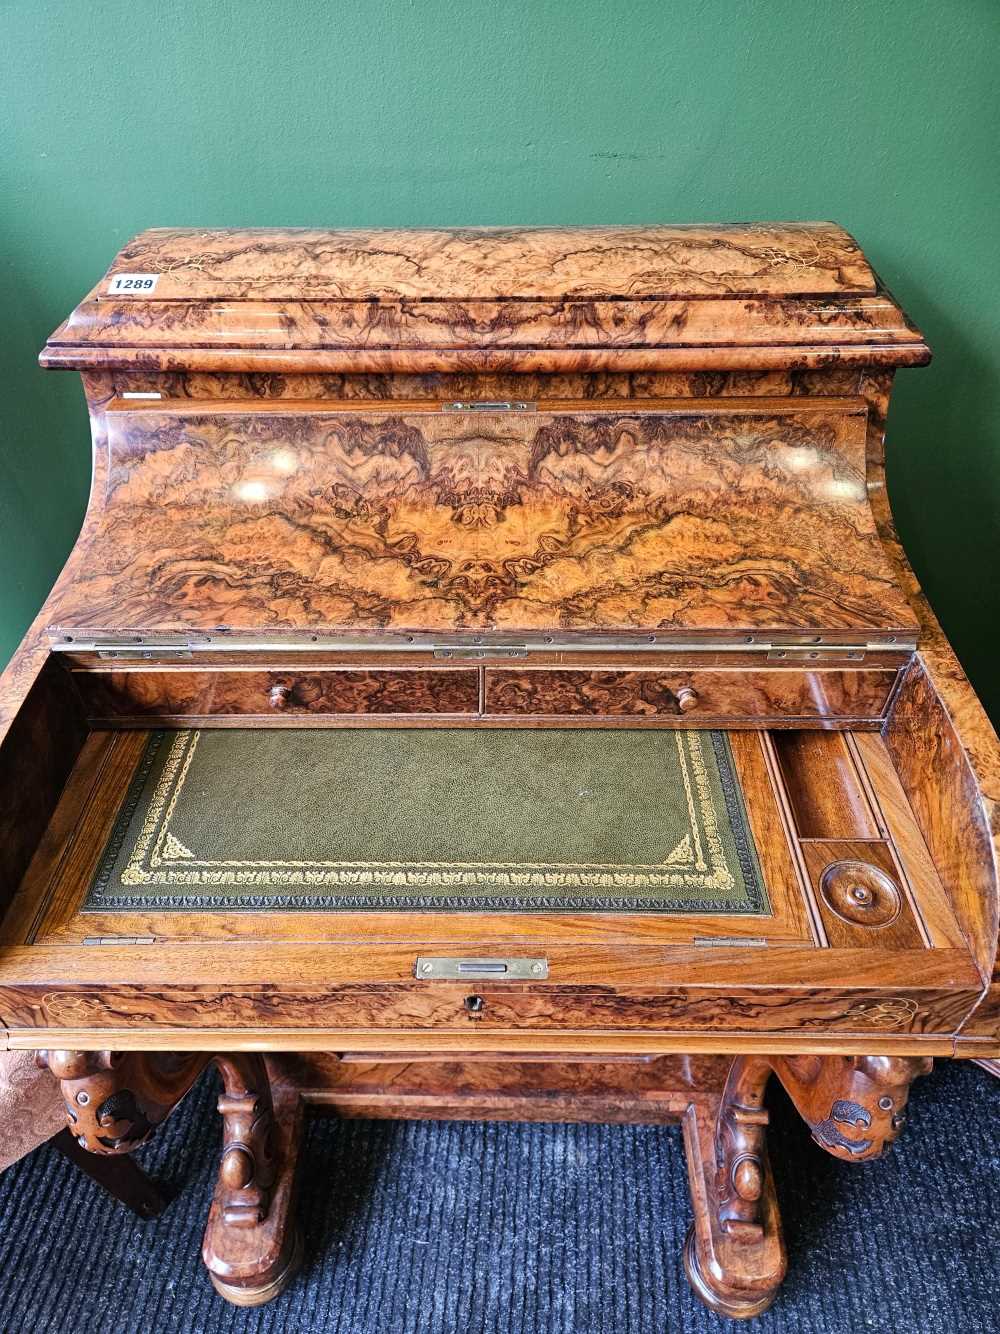 A fine Victorian burr walnut piano top pop up Davenport desk. Slight bubbling to the veneer on the - Image 6 of 47